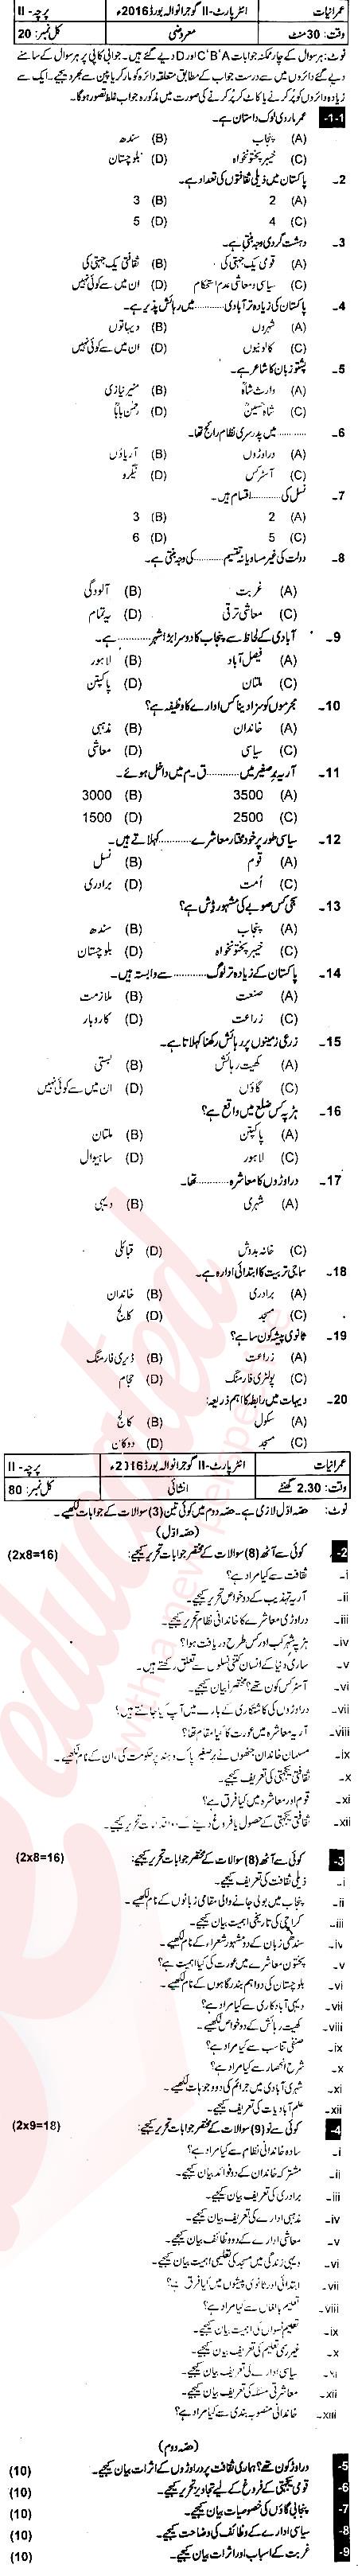 Sociology FA Part 2 Past Paper Group 1 BISE Gujranwala 2016